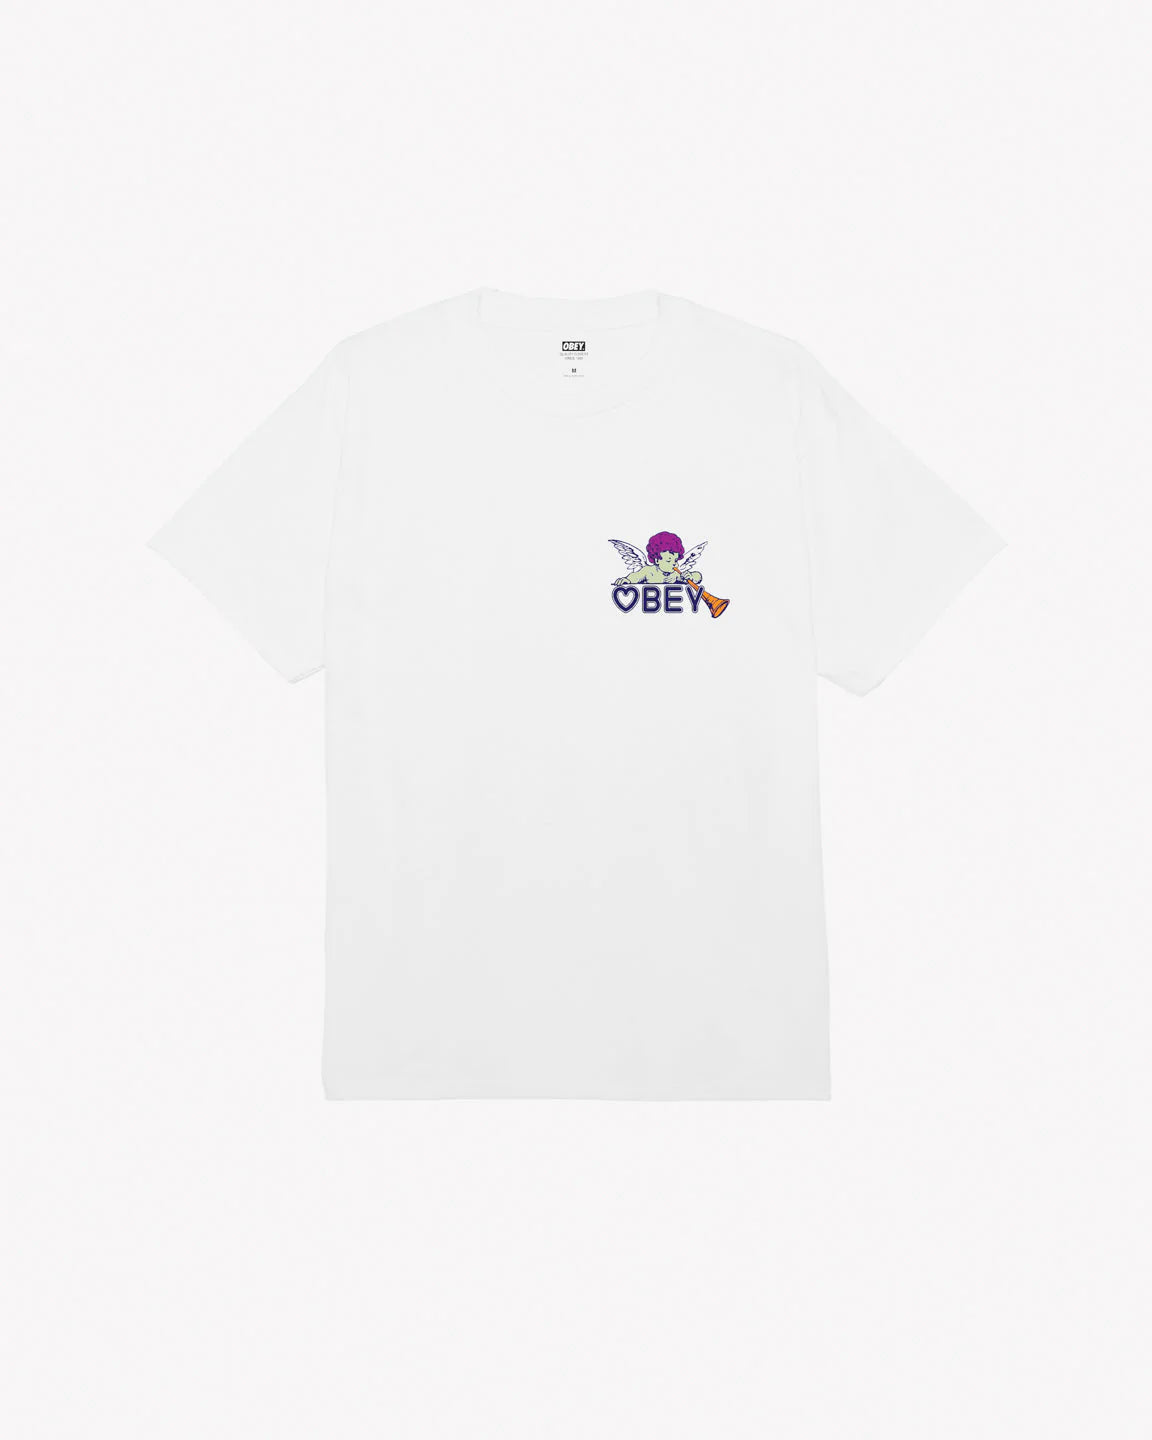 OBEY - BABY ANGEL CLASSIC T-SHIRT